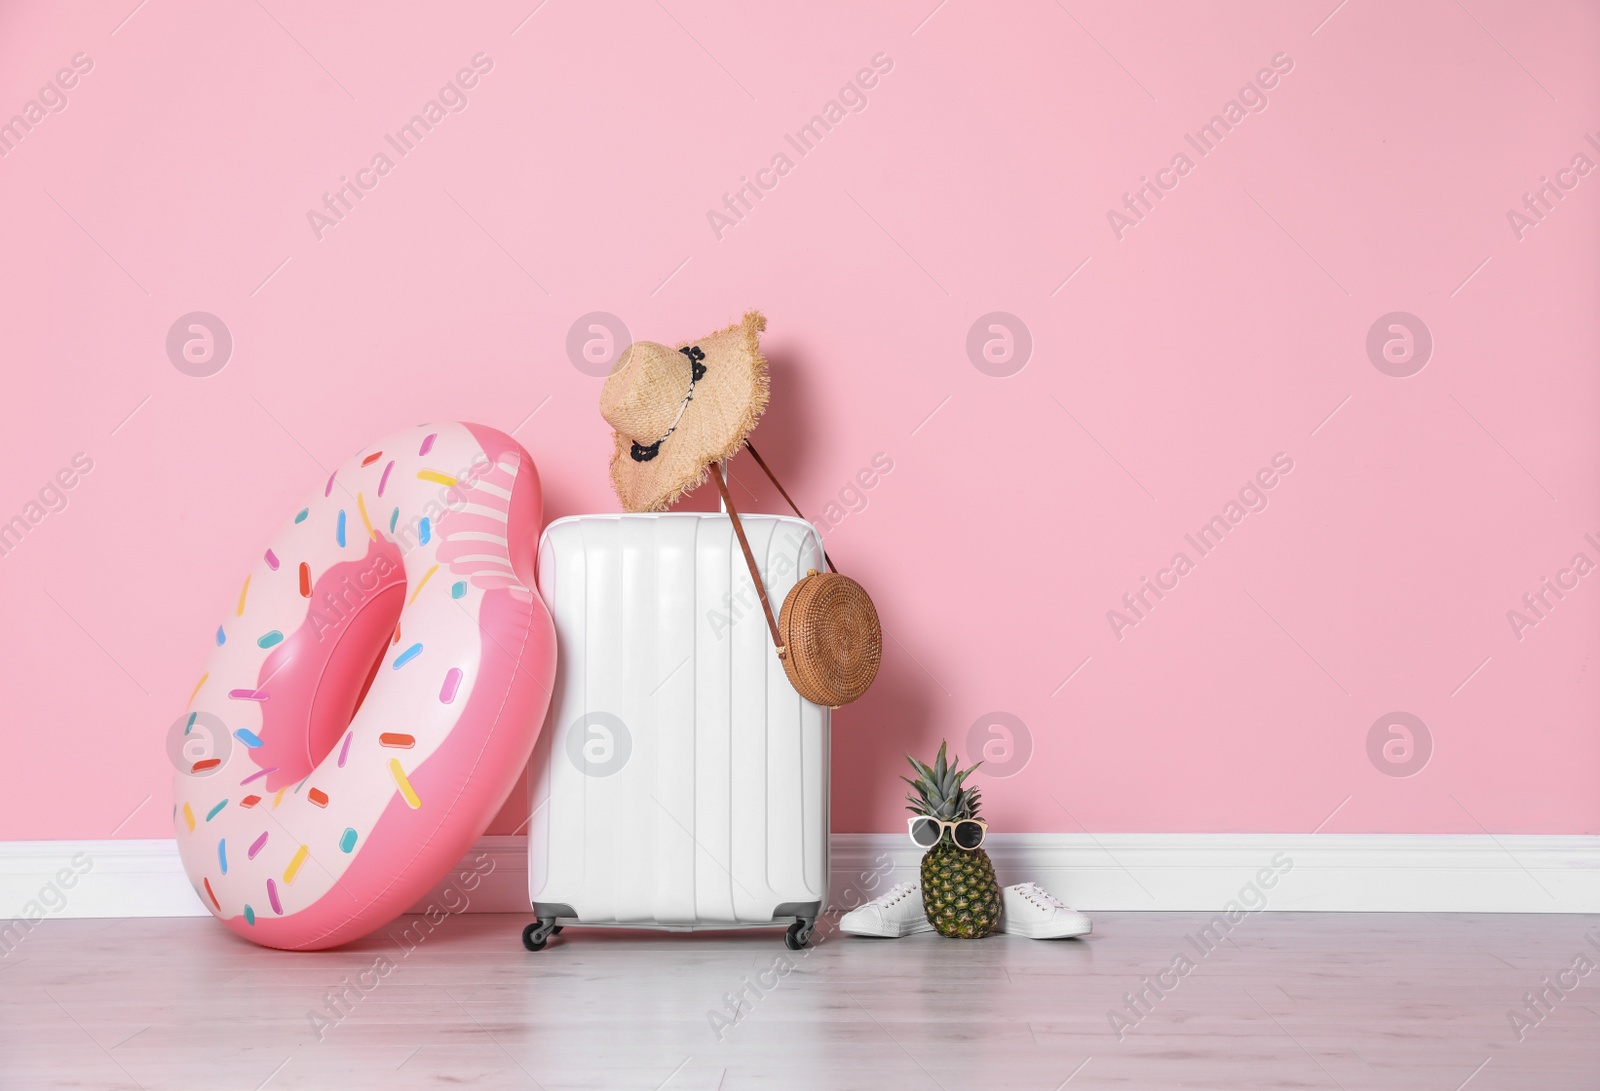 Photo of Large suitcase for travelling and beach items with space for text near color wall